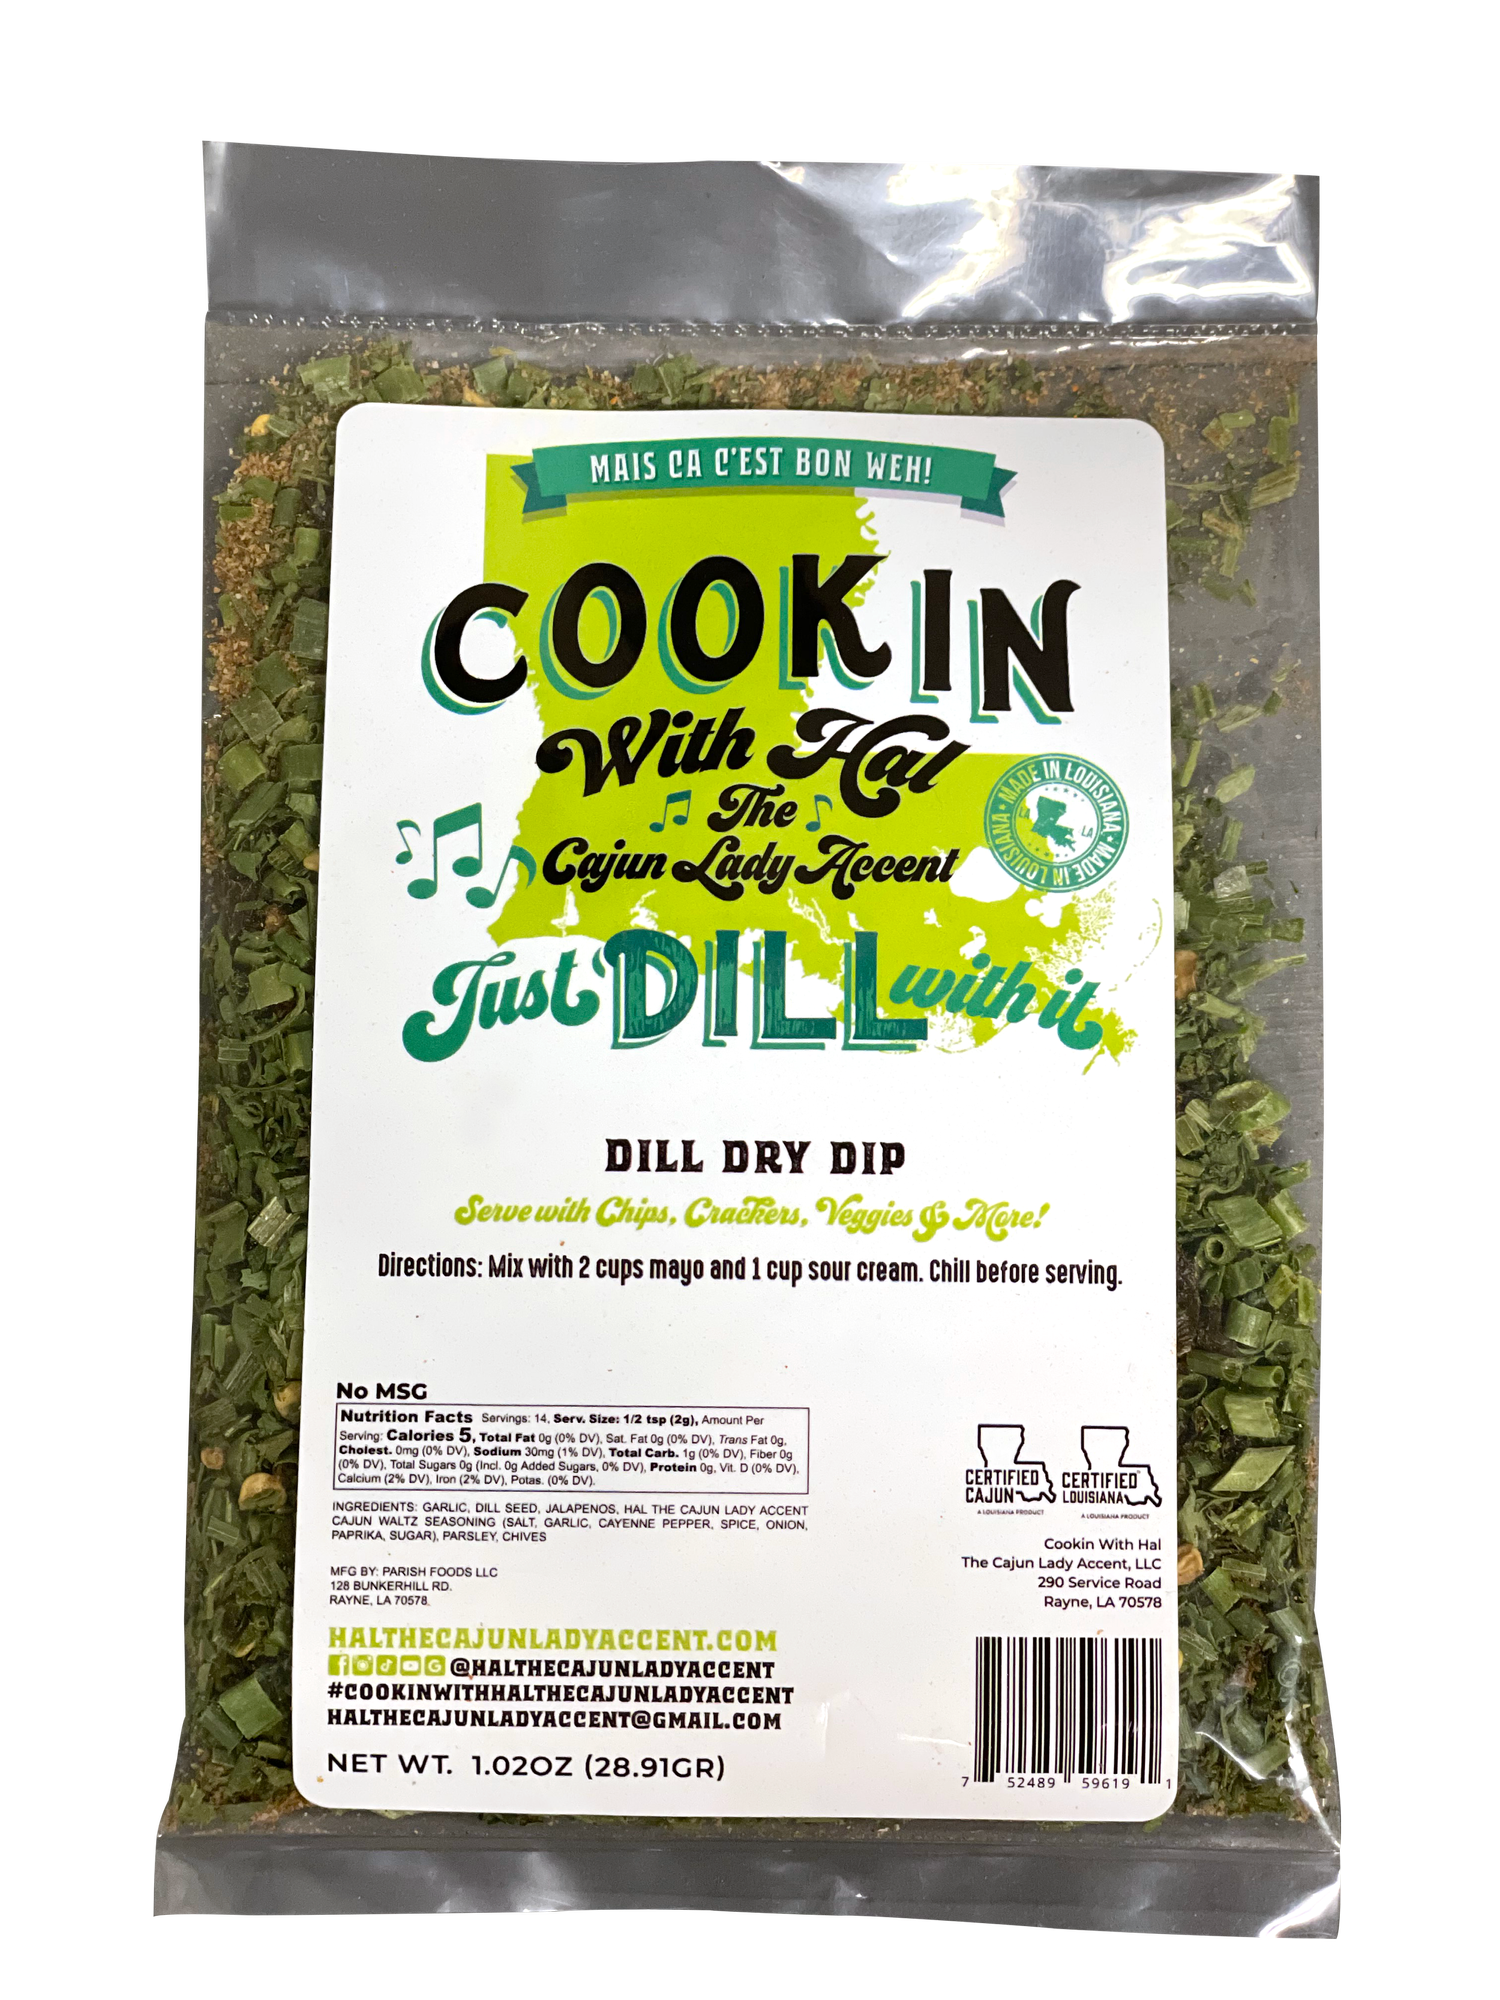 Just Dill With It Dry Dip — Hal the Cajun Lady Accent